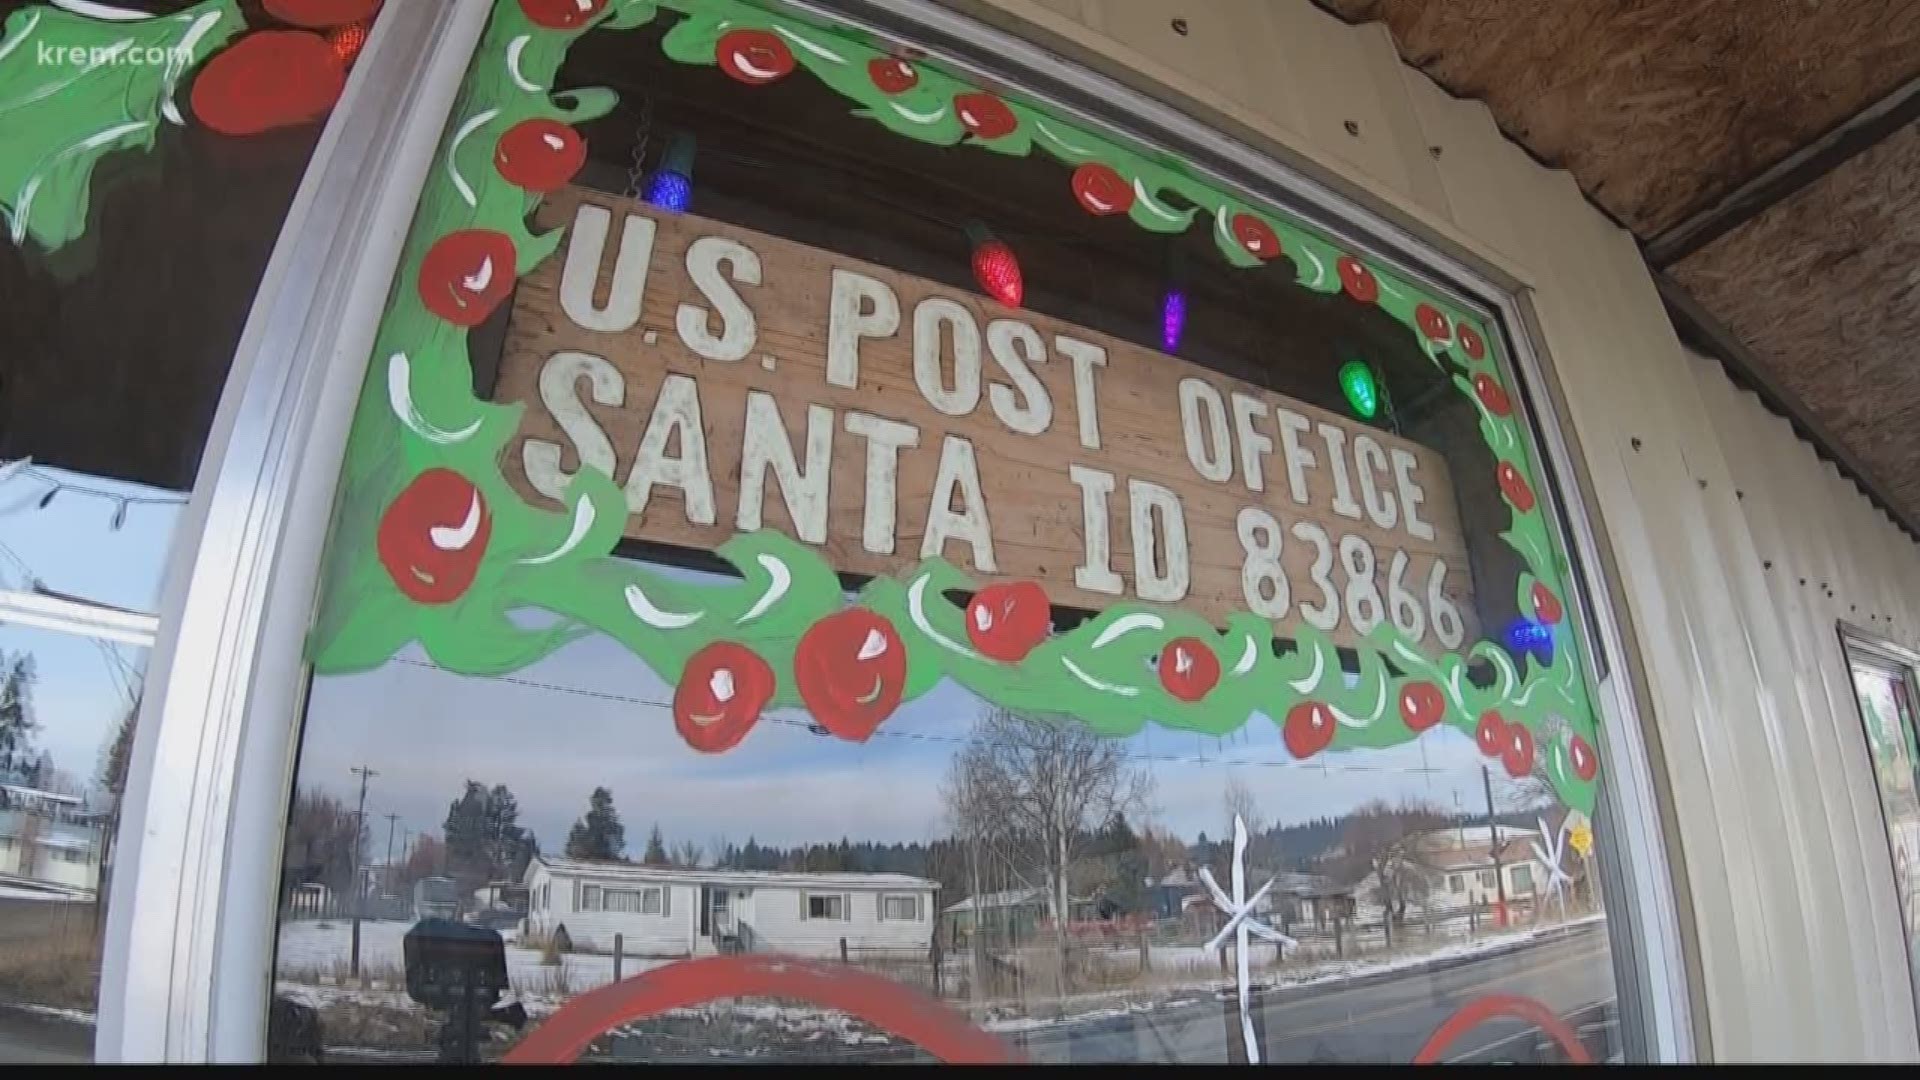 While the town in Benewah County isn't named after Kris Kringle, our Taylor Viydo set out to find if Santa, Idaho felt any extra holiday spirit.